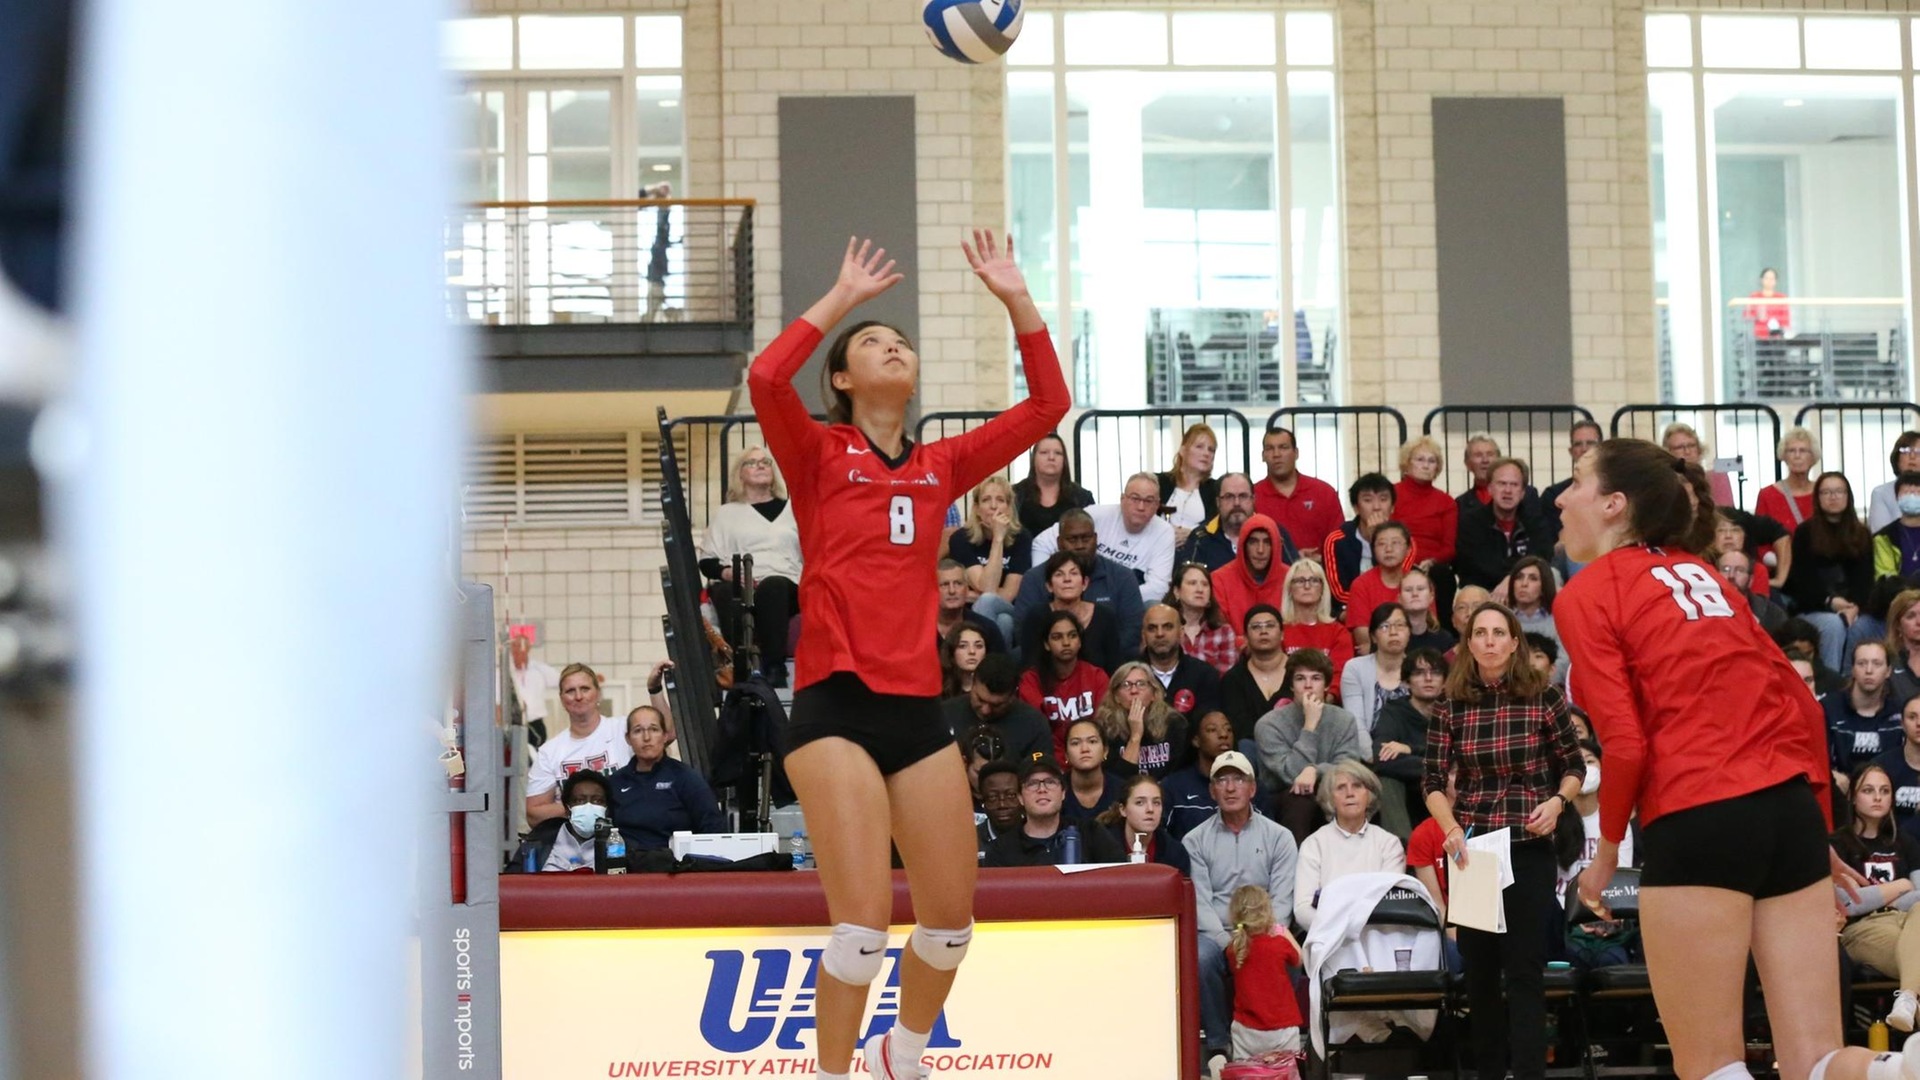 women's volleyball player jumping in the air ready to set a ball for a teammate